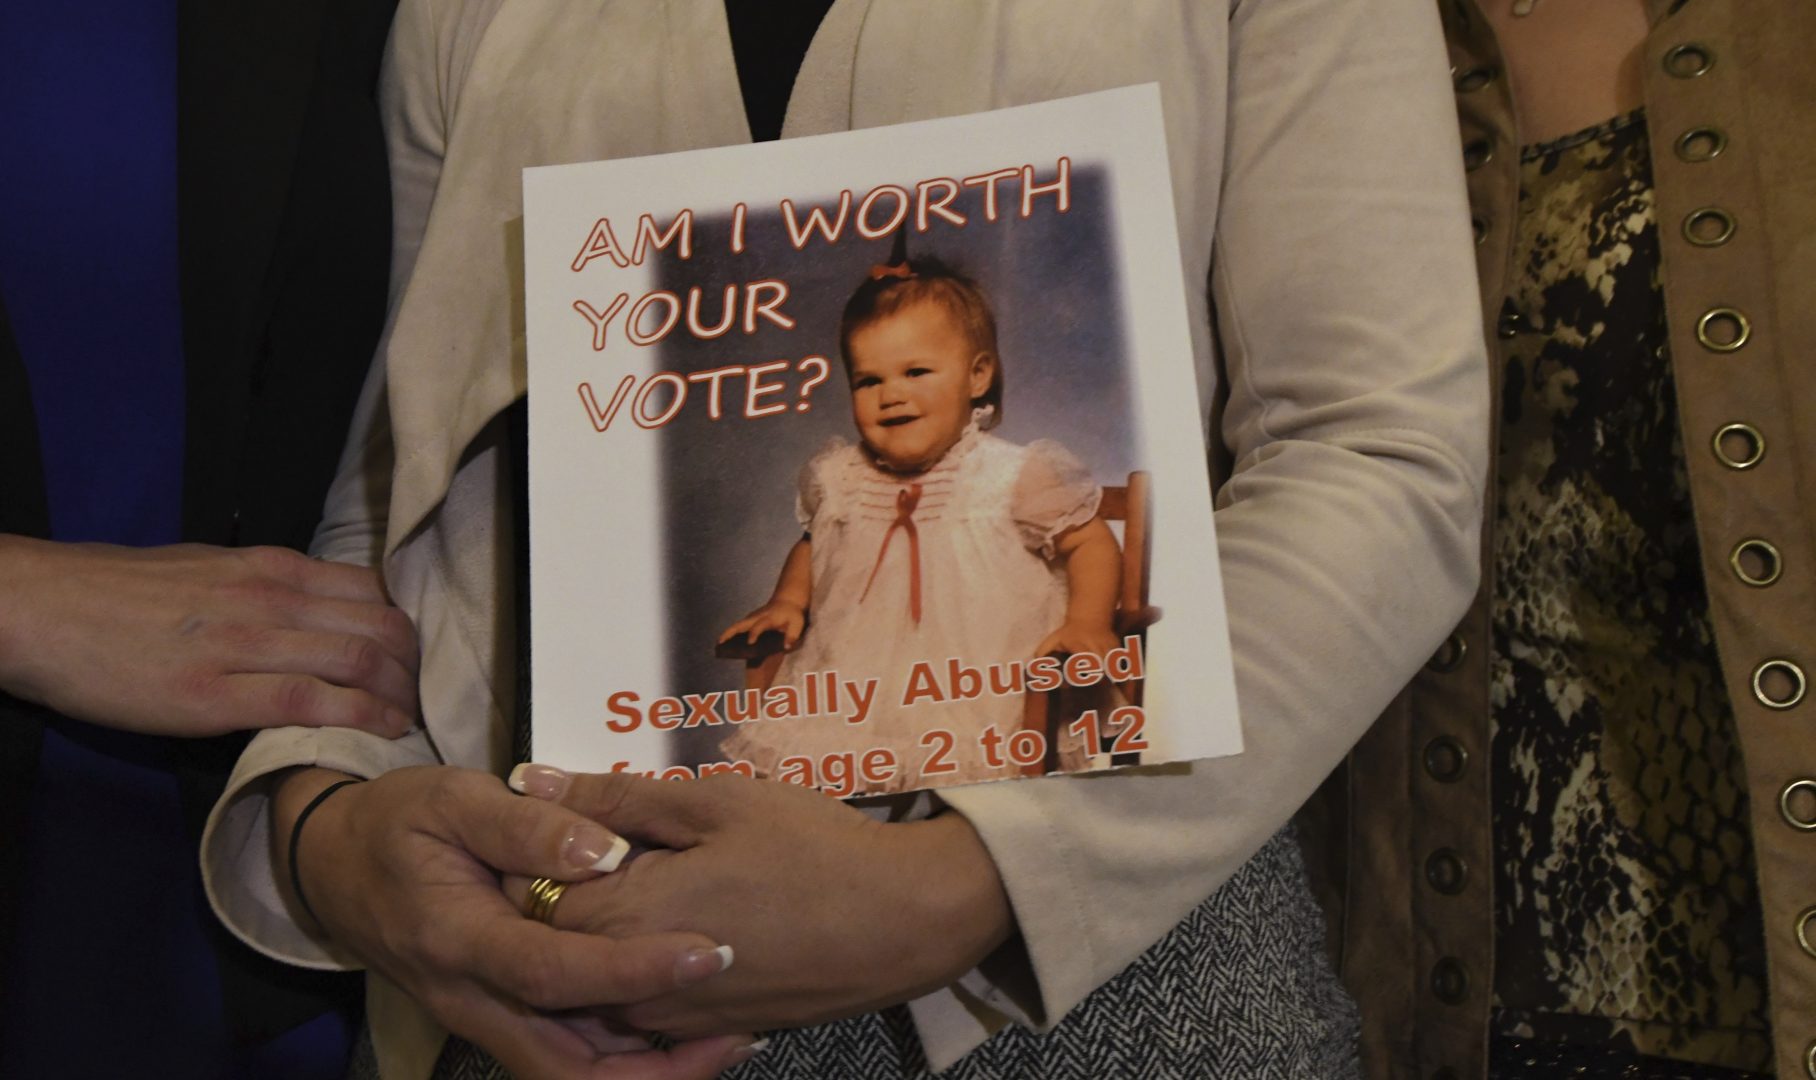 FILE PHOTO: Carolyn Fortney, a survivor of sexual abuse at the hands of her family's Roman Catholic parish priest as a child, awaits legislation in the Pennsylvania Capitol to respond to a landmark state grand jury report on child sexual abuse in the Catholic Church, Wednesday, Oct. 17, 2018 in Harrisburg.